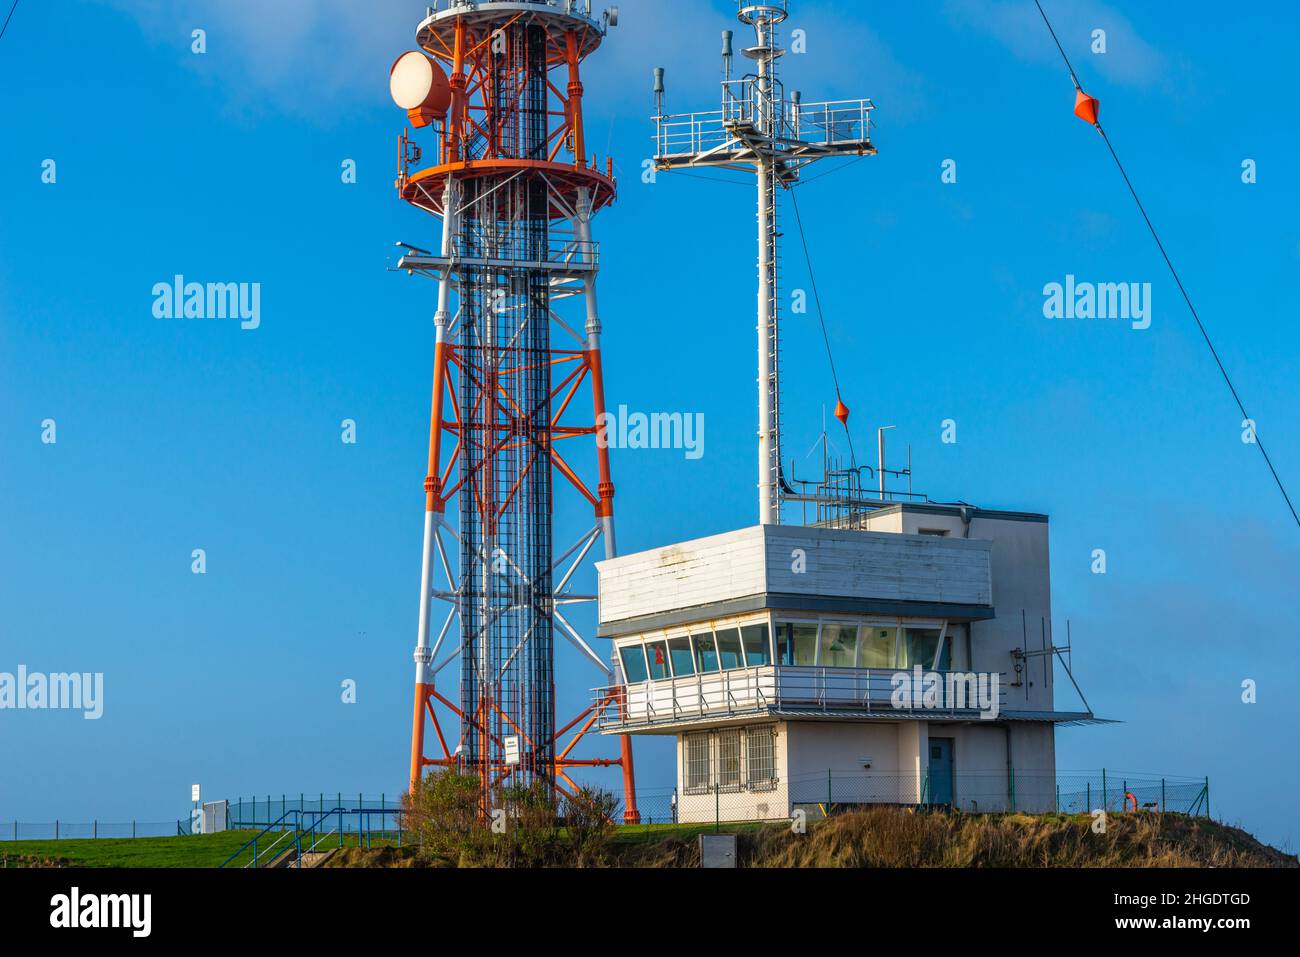 Radar Tower on the Oberland Upper Land of North Sea island of Heligoland, Northern Germany, Central Europe Stock Photo